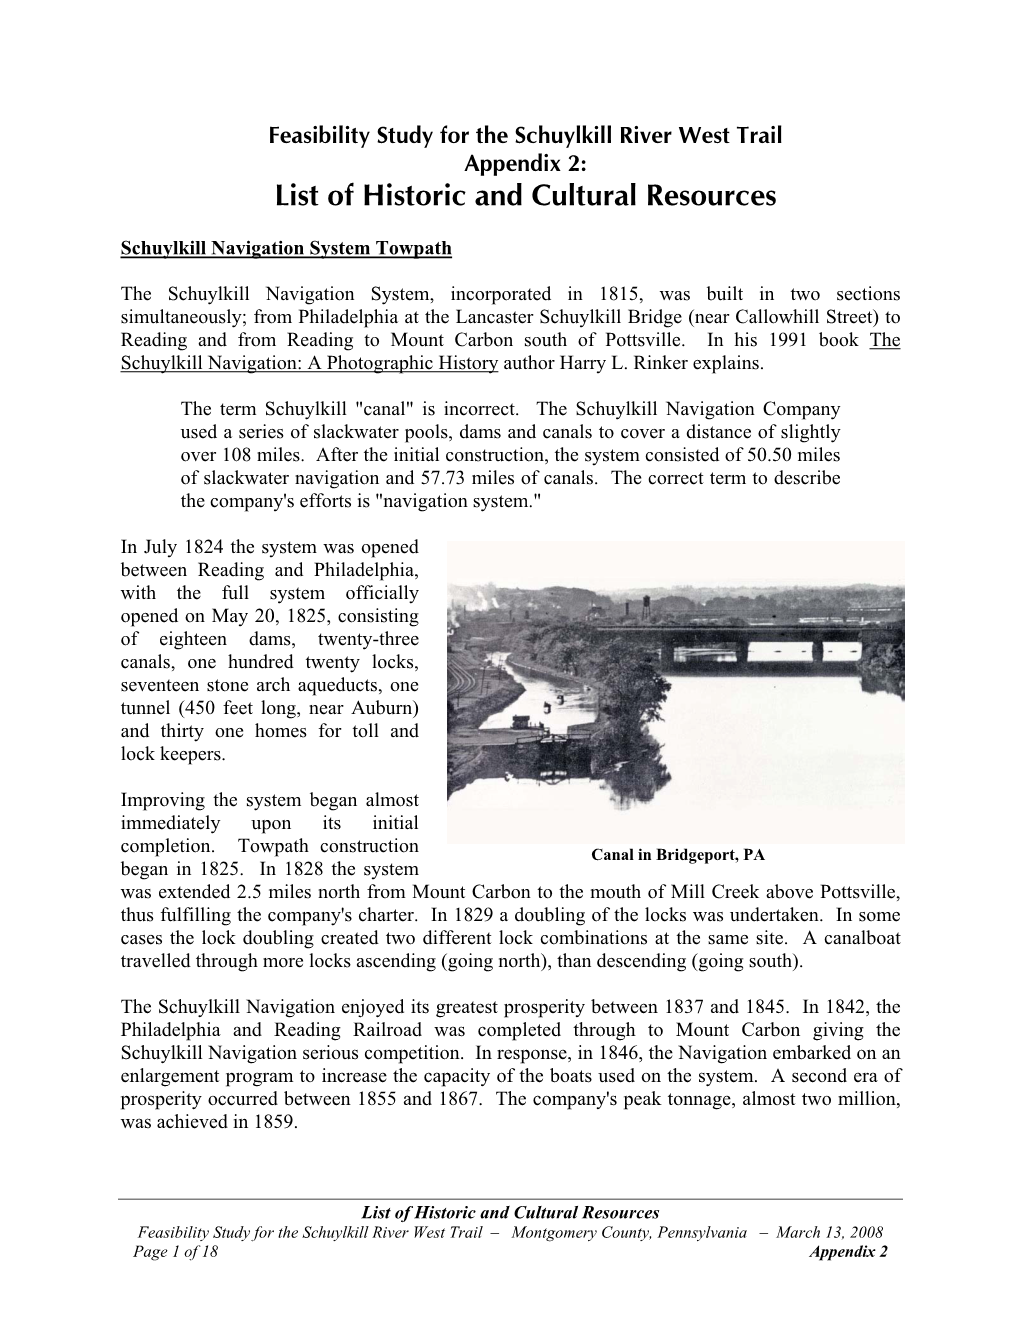 List of Historic and Cultural Resources